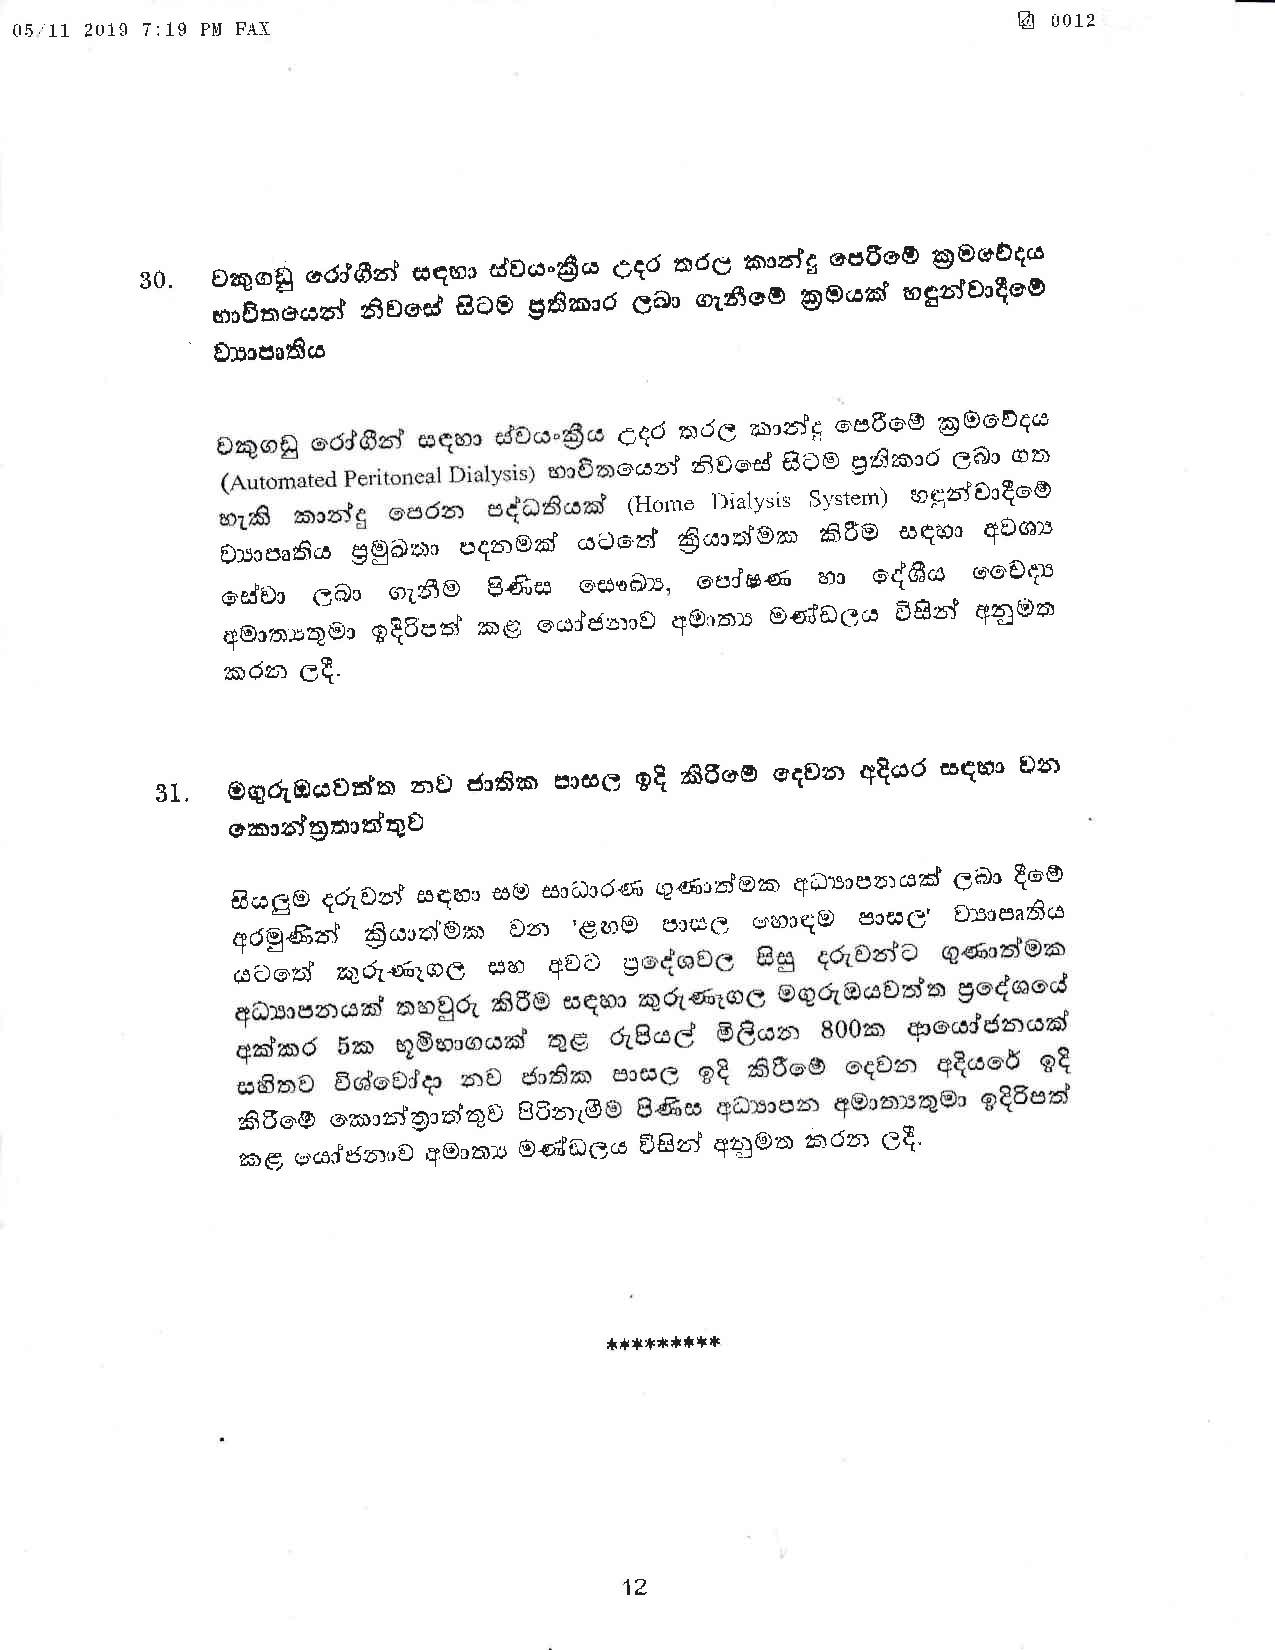 Cabinet Decision on 05.11.2019 page 012